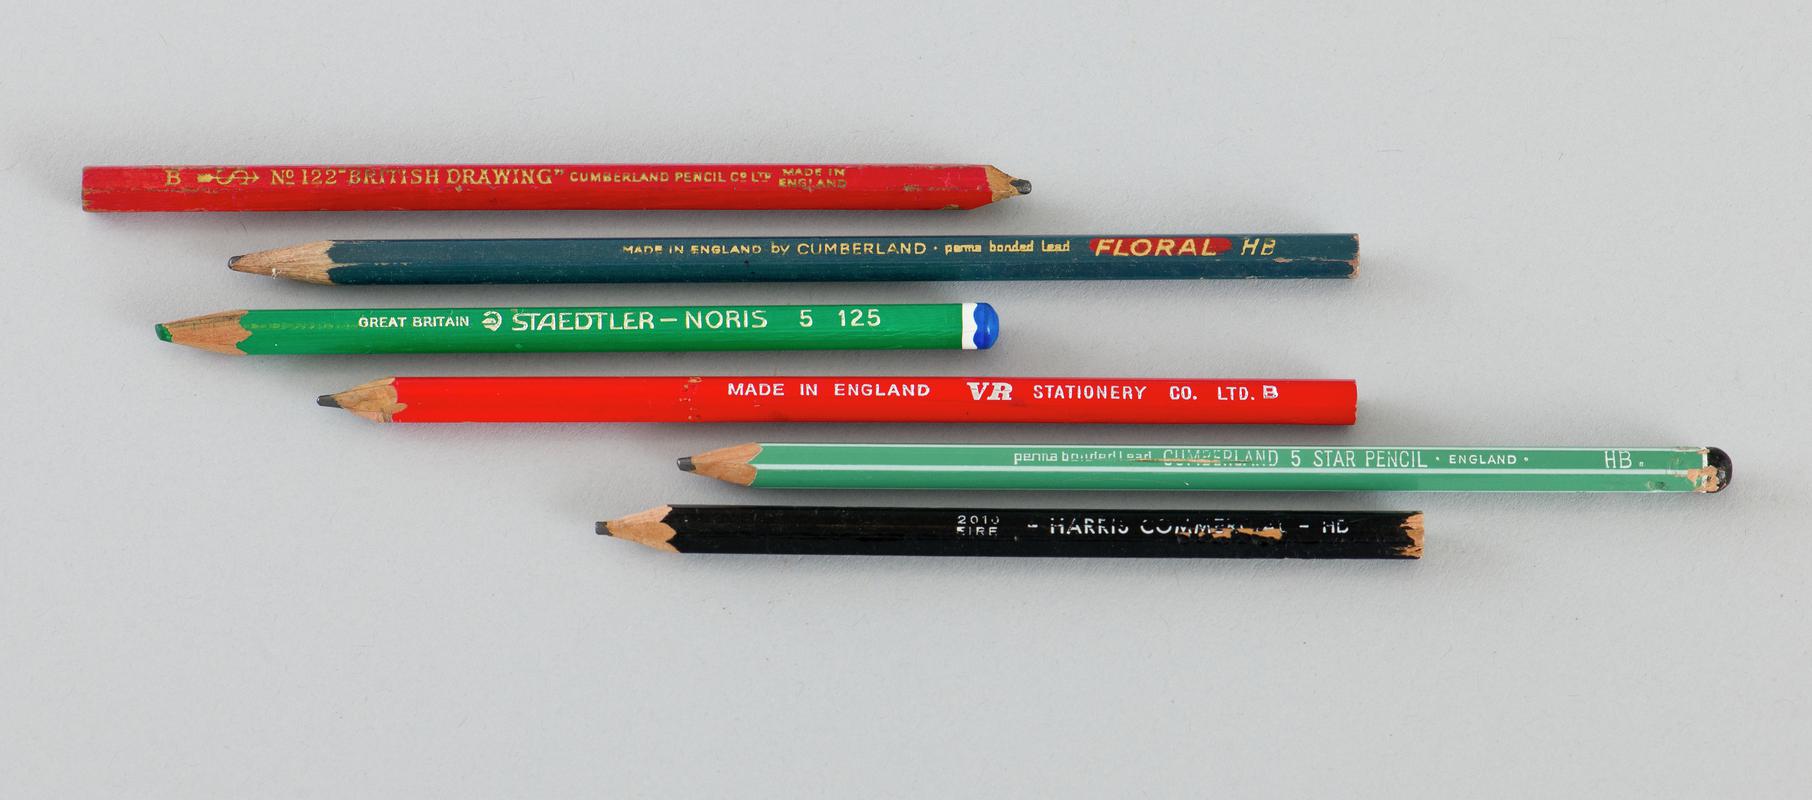 Six pencils (two green, two red, one blue and one black).